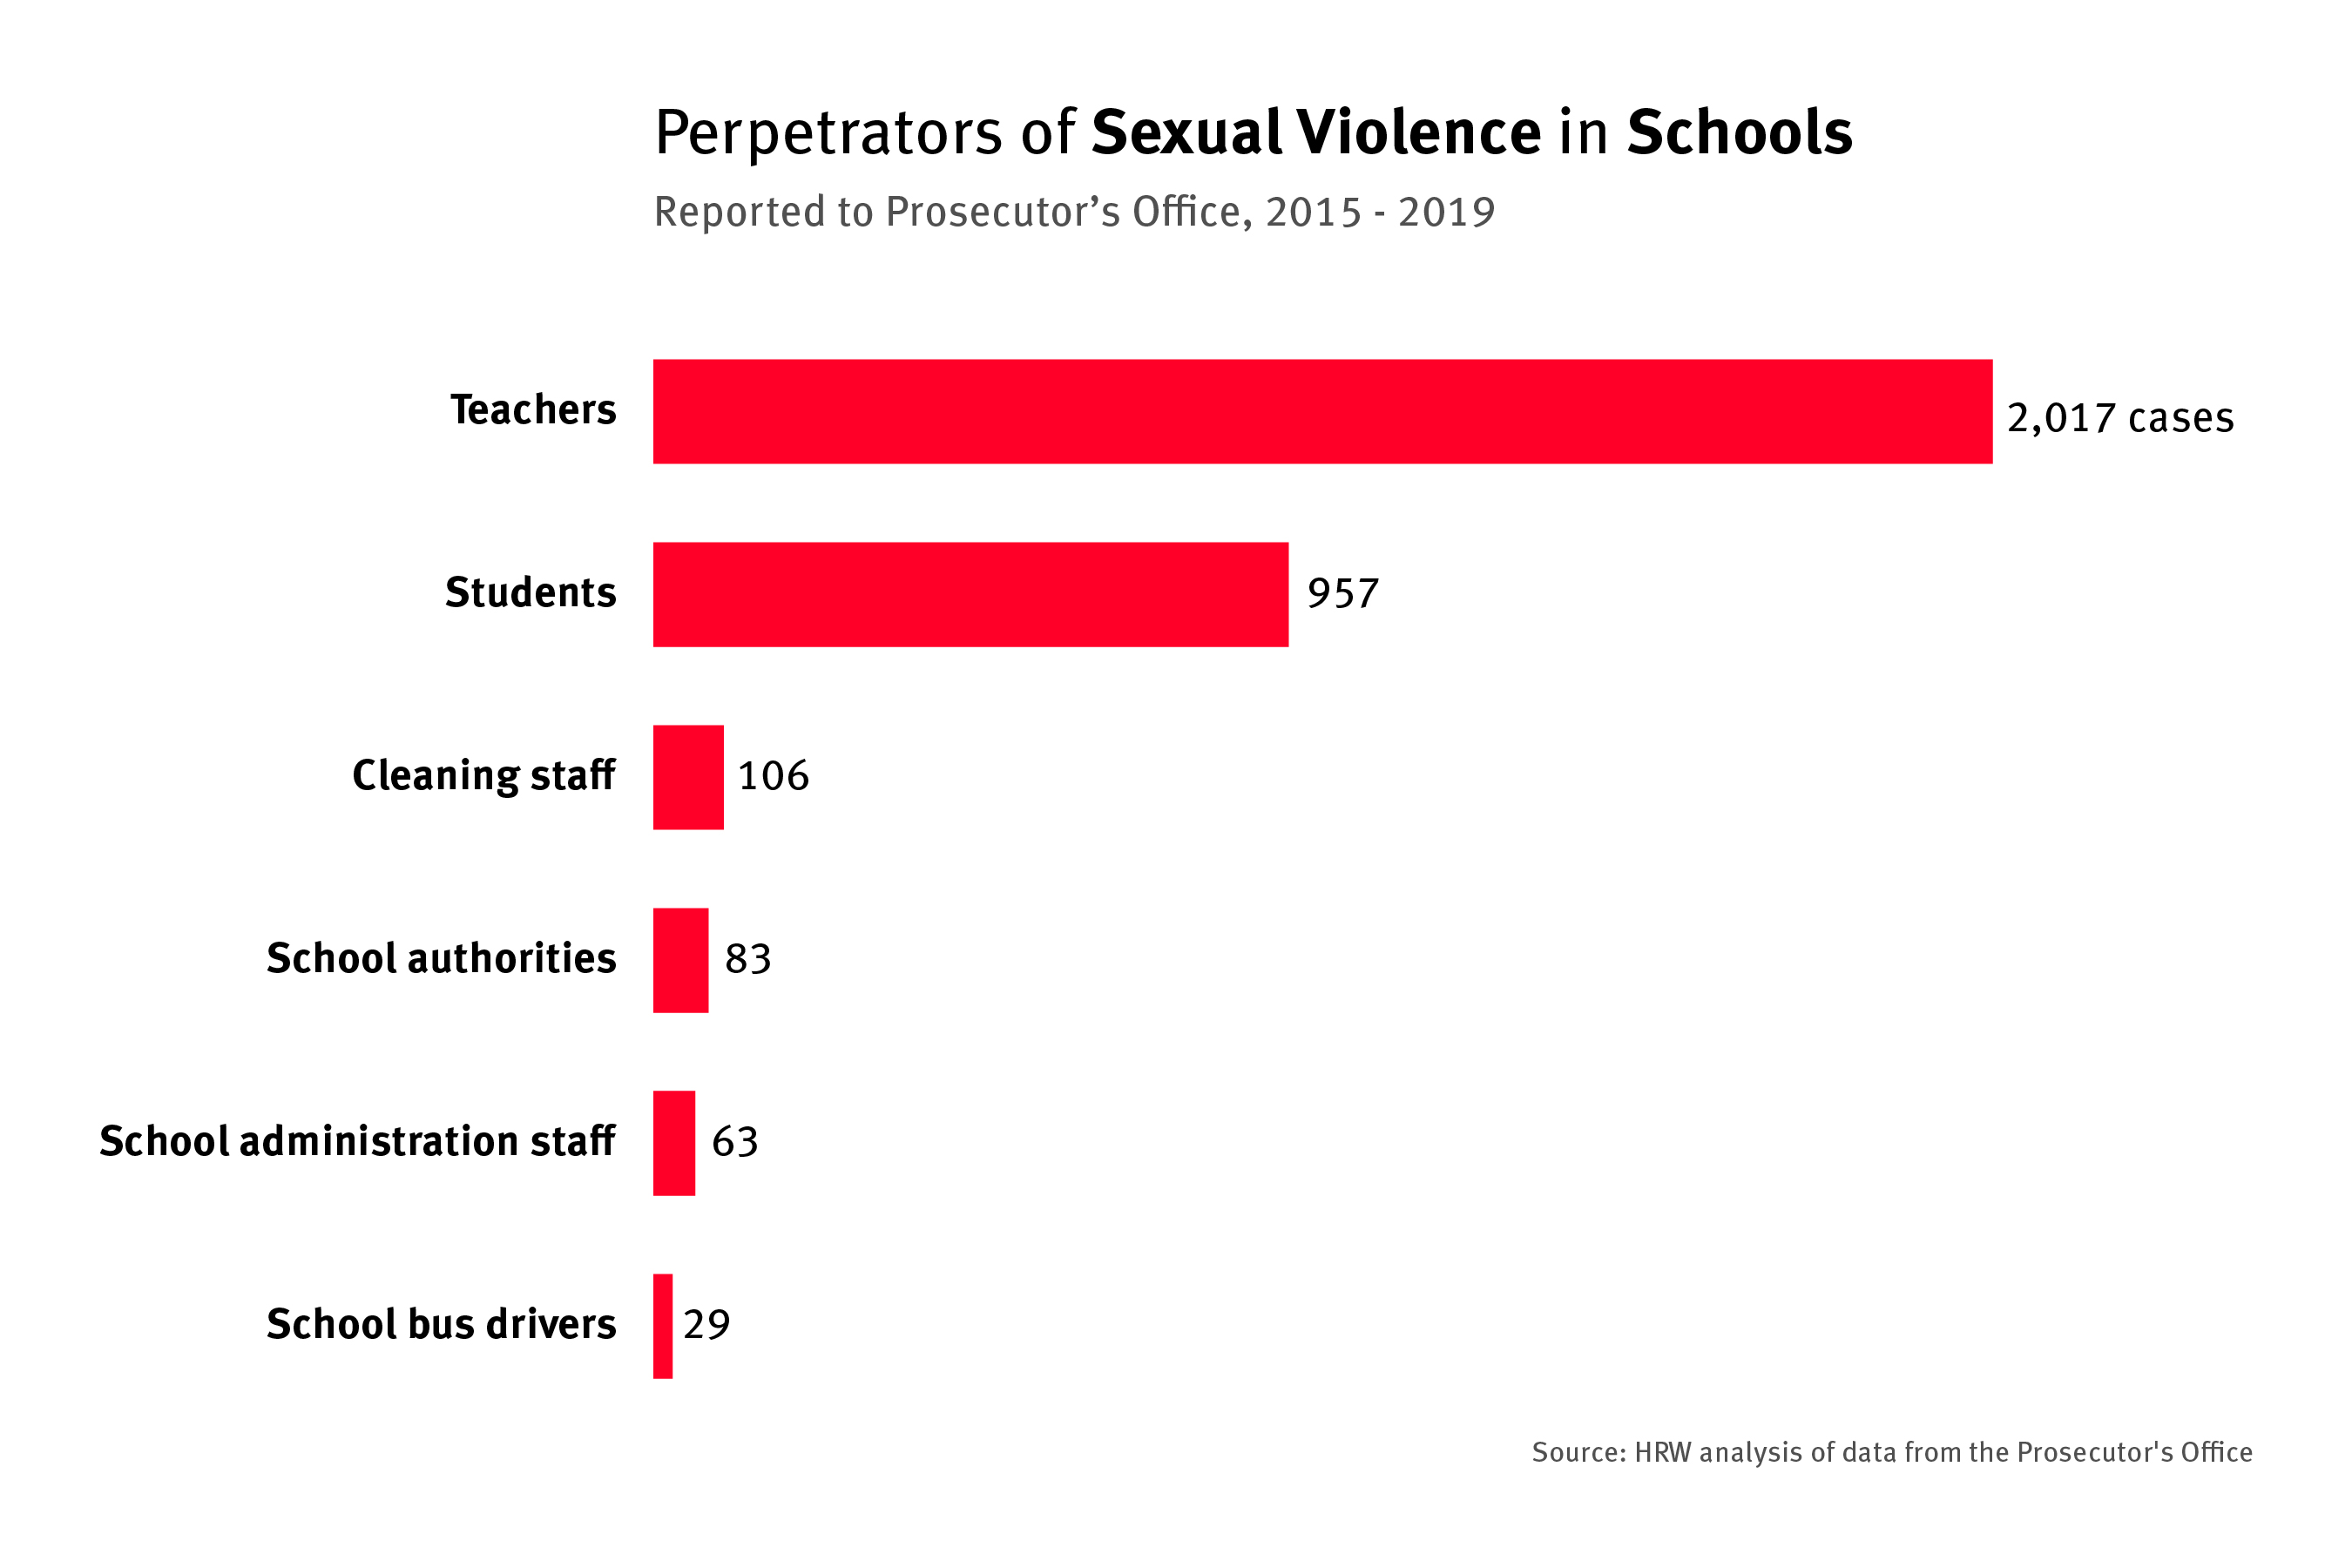 A bar graph that compares the number of sexual violence cases perpetrated by occupation in Ecuador's schools